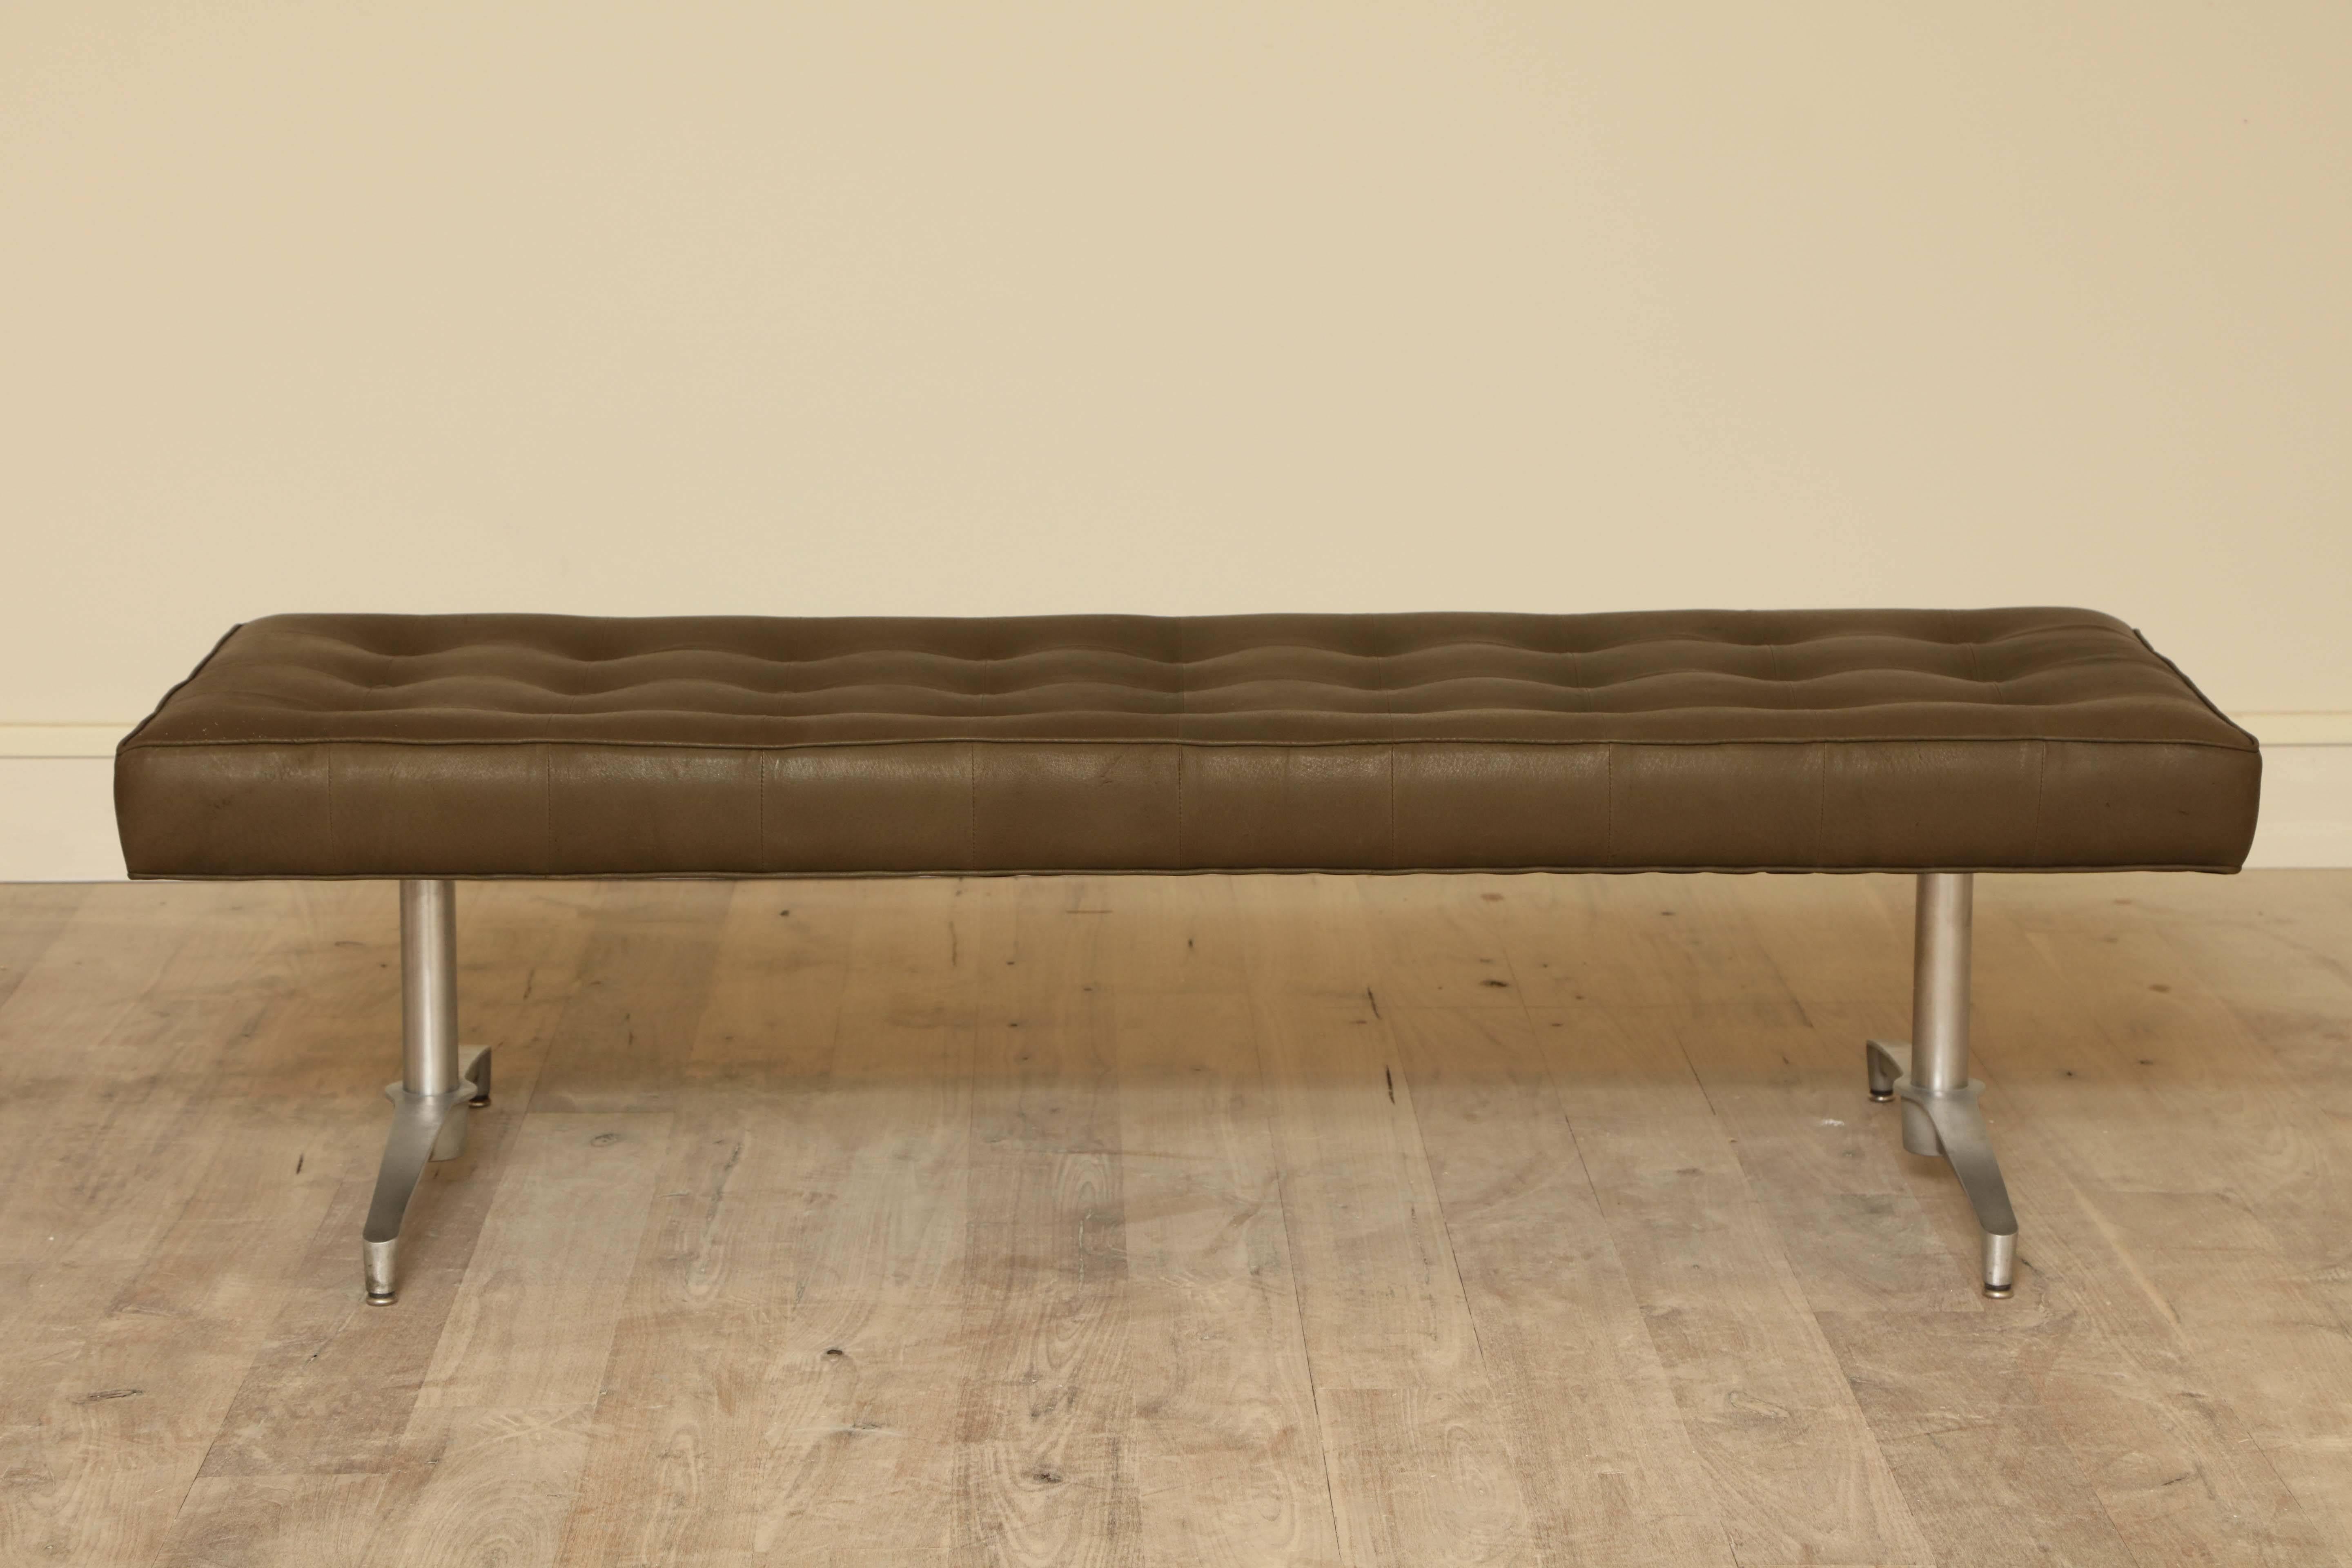 Tufted bench by Shelby Williams, circa 1950 with brushed aluminum legs reupholstered in olive leather.